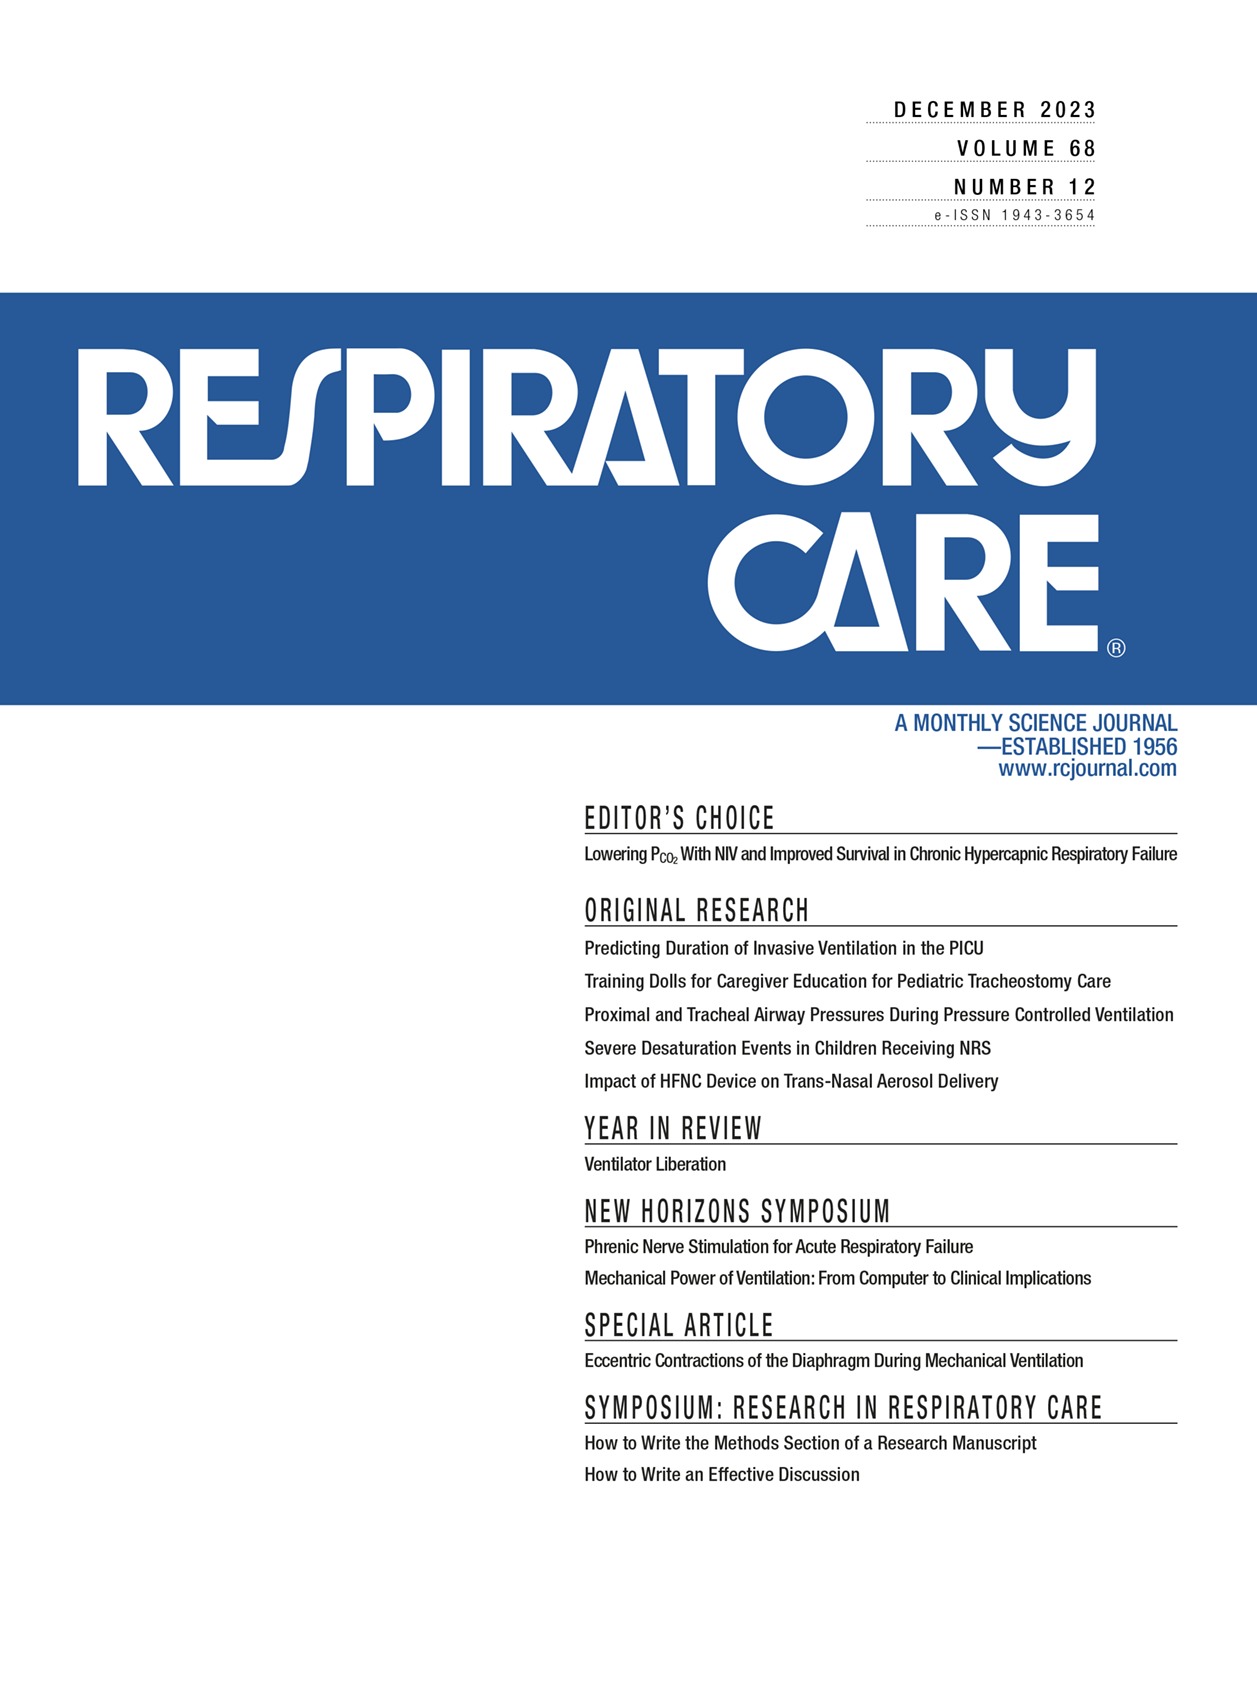 Associations With Severe Desaturation Events Among Children Receiving Noninvasive Respiratory Support at Time of Intubation